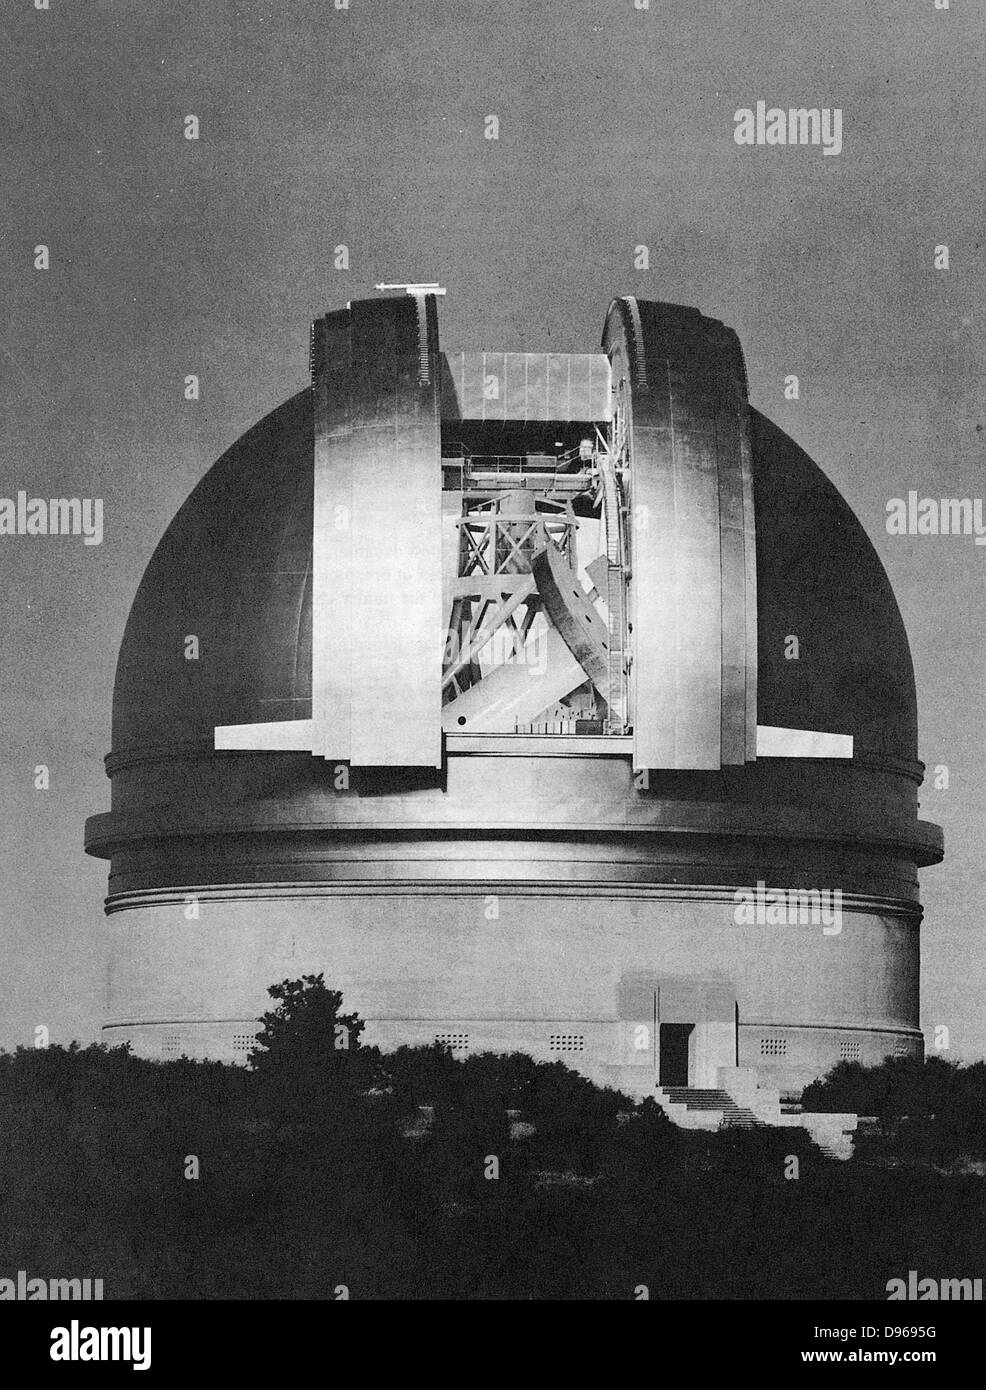 200-inch Hale telescope at Palomar Observatory shown at night. Built in 1948 and named for George Ellery Hale (1868-1938) Courtesy of Mount Wilson and Palomar Observatories. Stock Photo